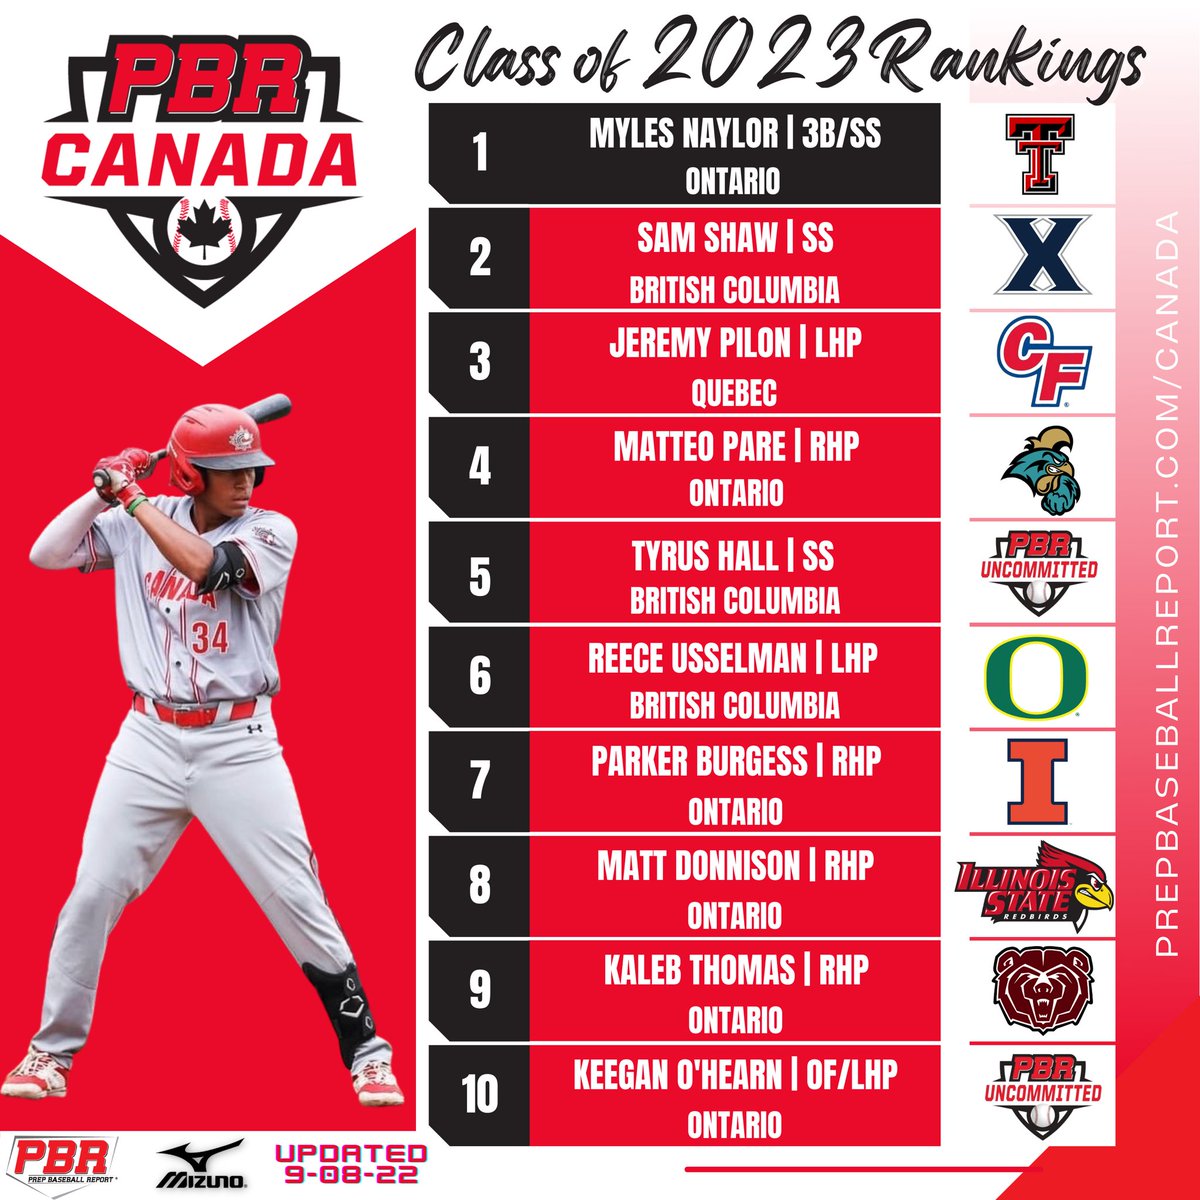 🇨🇦𝗖𝗹𝗮𝘀𝘀 𝗼𝗳 𝟮𝟬𝟮𝟯 𝗥𝗮𝗻𝗸𝗶𝗻𝗴𝘀🇨🇦 The inaugural National Class of 2023 Rankings is revealed‼️ A strong trio of MLB Draft prospects from three different provinces lead the way with Naylor, Shaw and Pilon. #BeSeen 🇨🇦